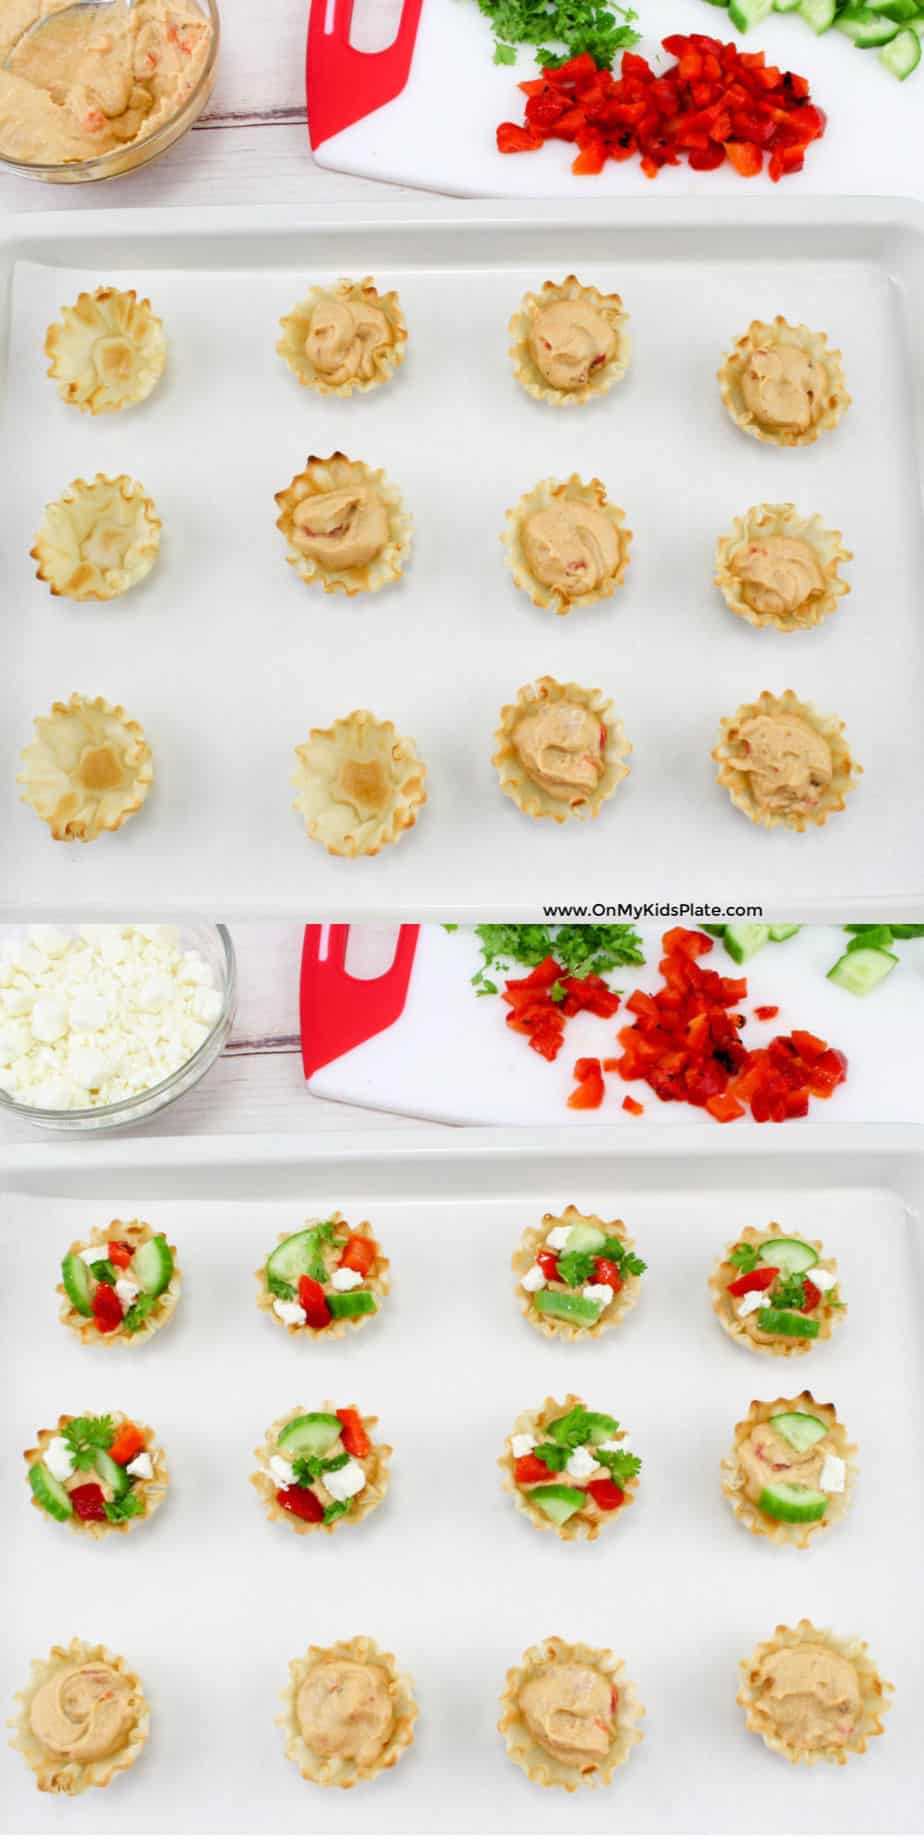 Phyllo cups being filled with hummus, then topped with chopped red pepper, cucumber and parsley from a cutting board and feta cheese from a bowl.